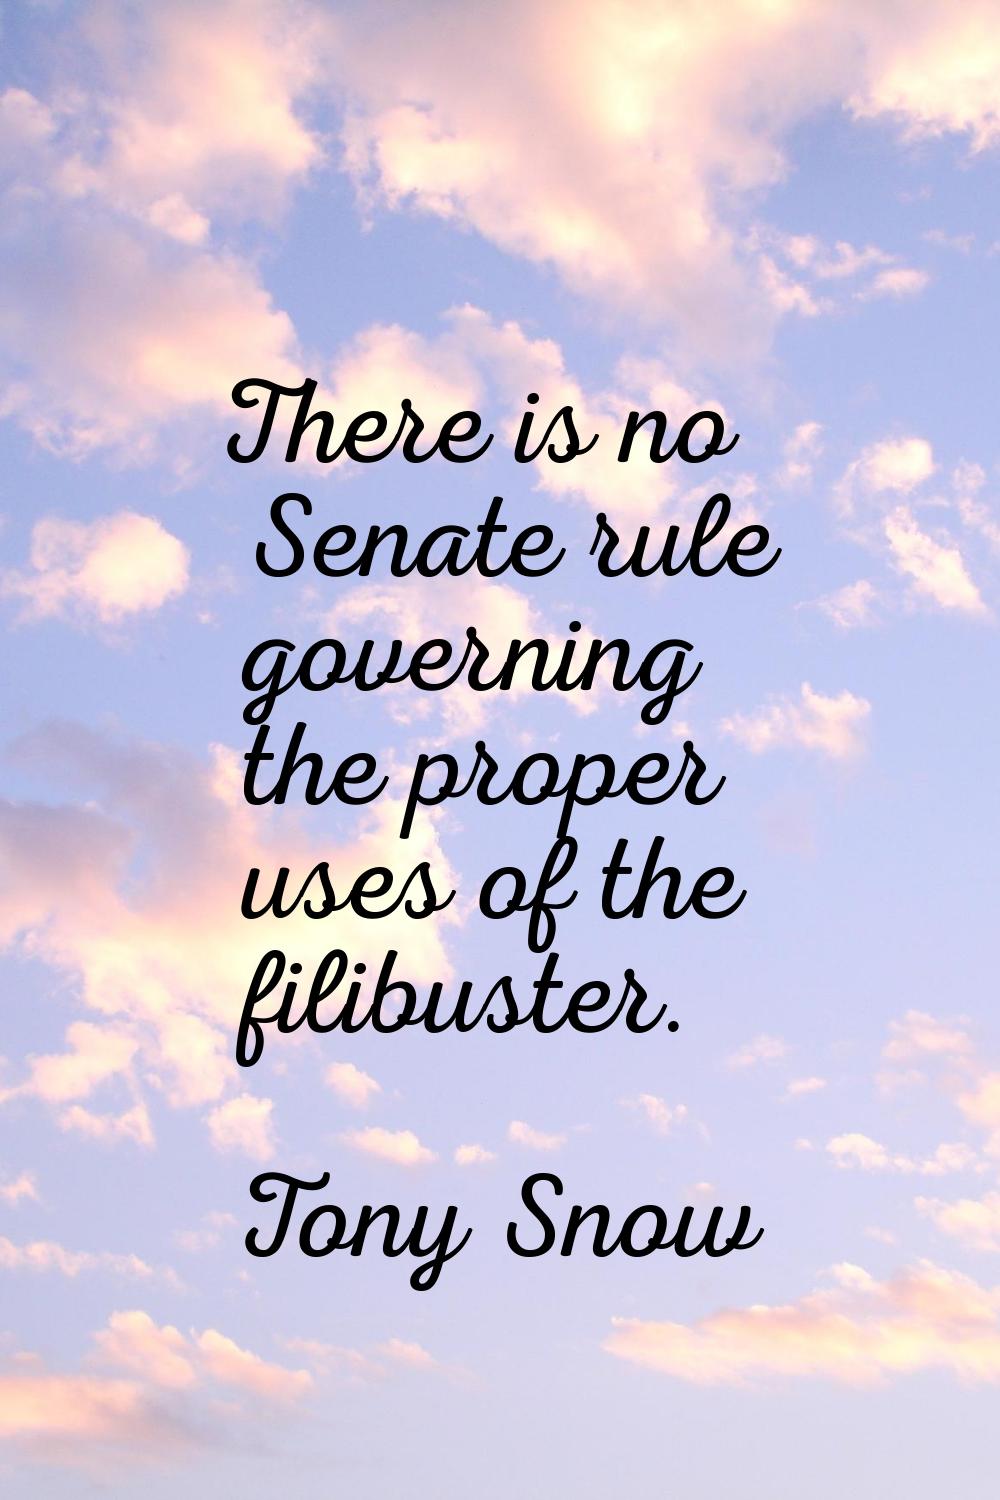 There is no Senate rule governing the proper uses of the filibuster.